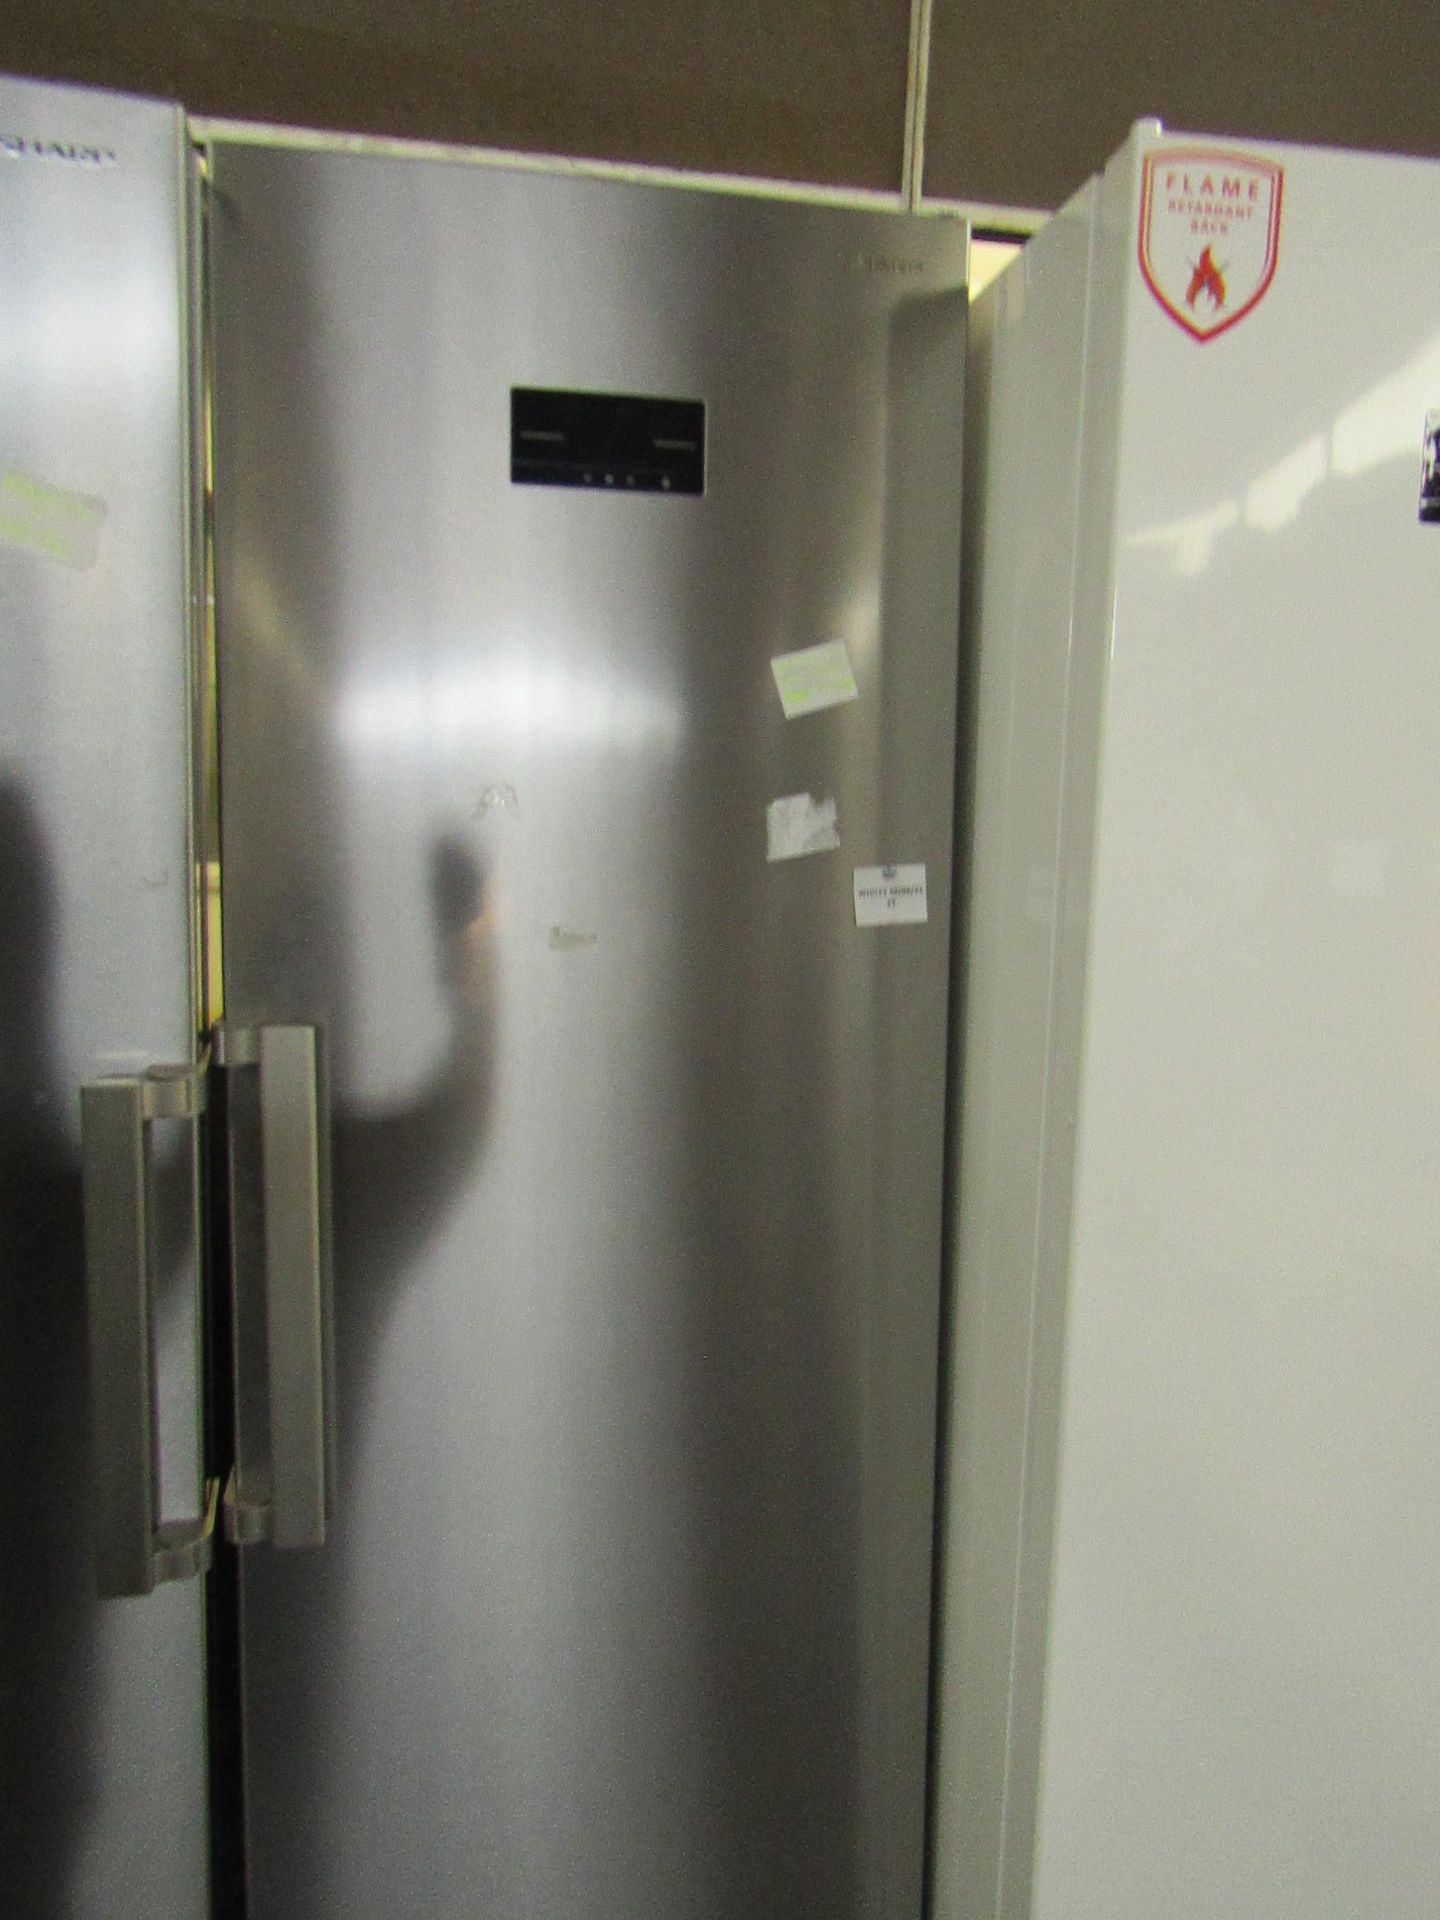 Sharp - Tall Stainless Steel Freestanding Fridge - Unable To Test Due to room temperature being